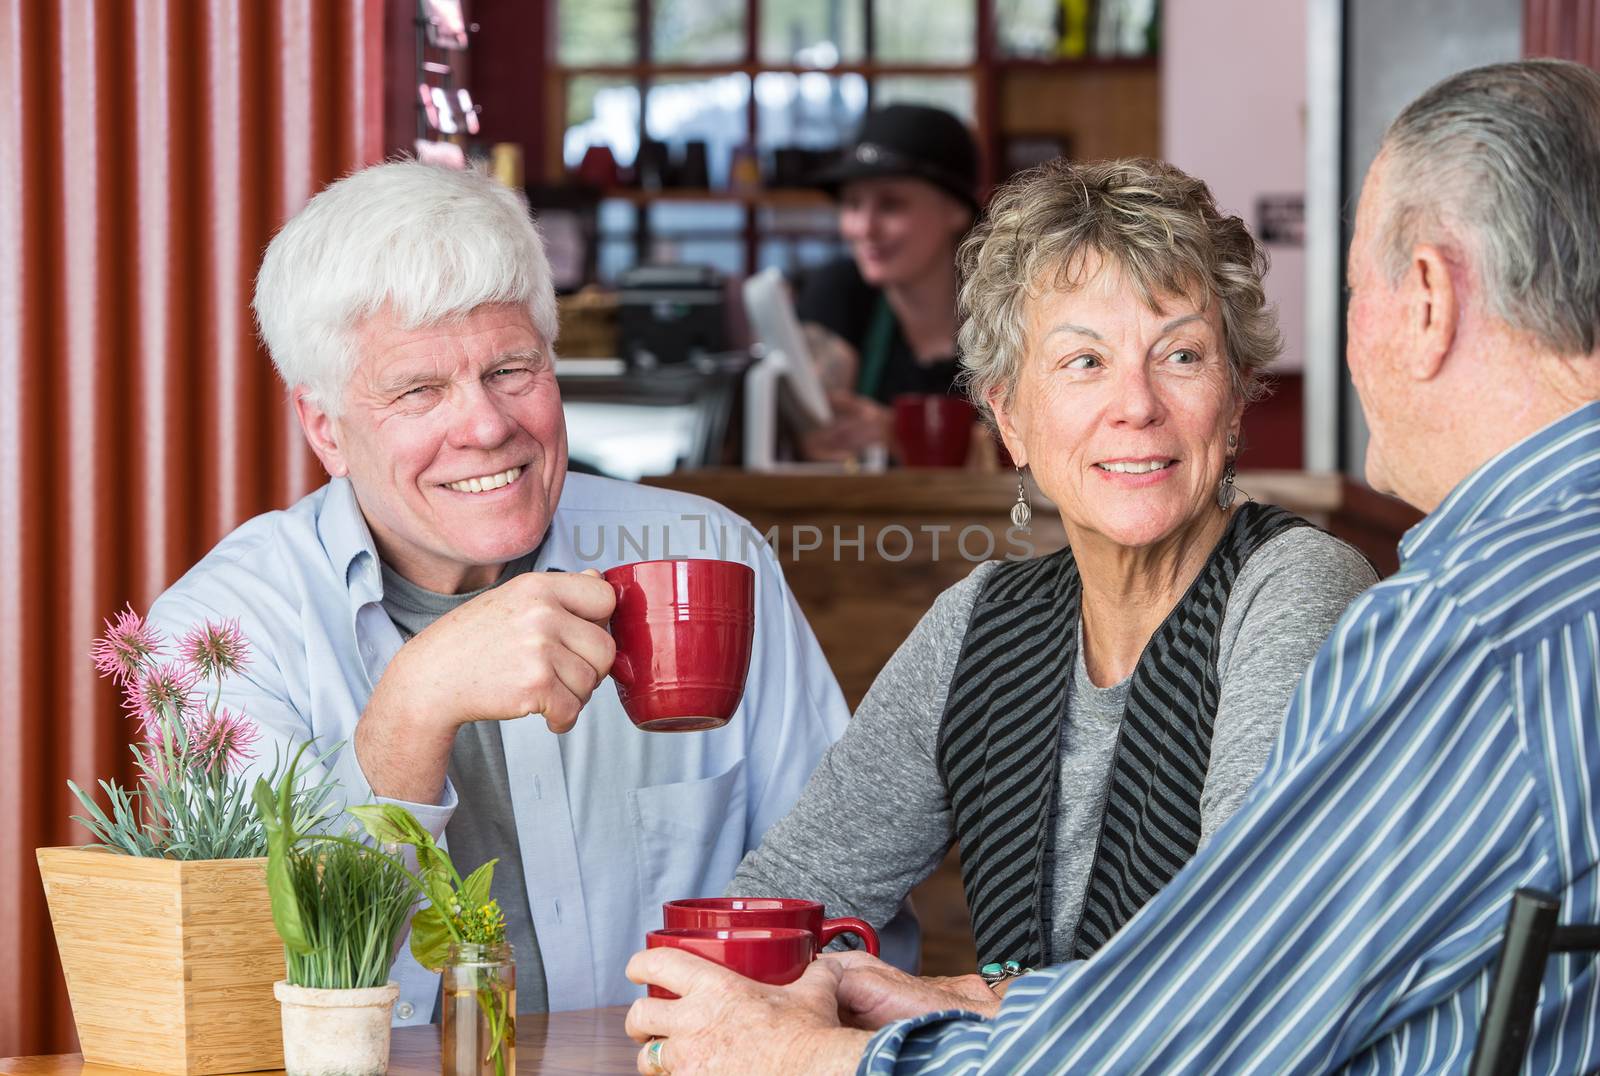 Smiling man with friends in a coffee house